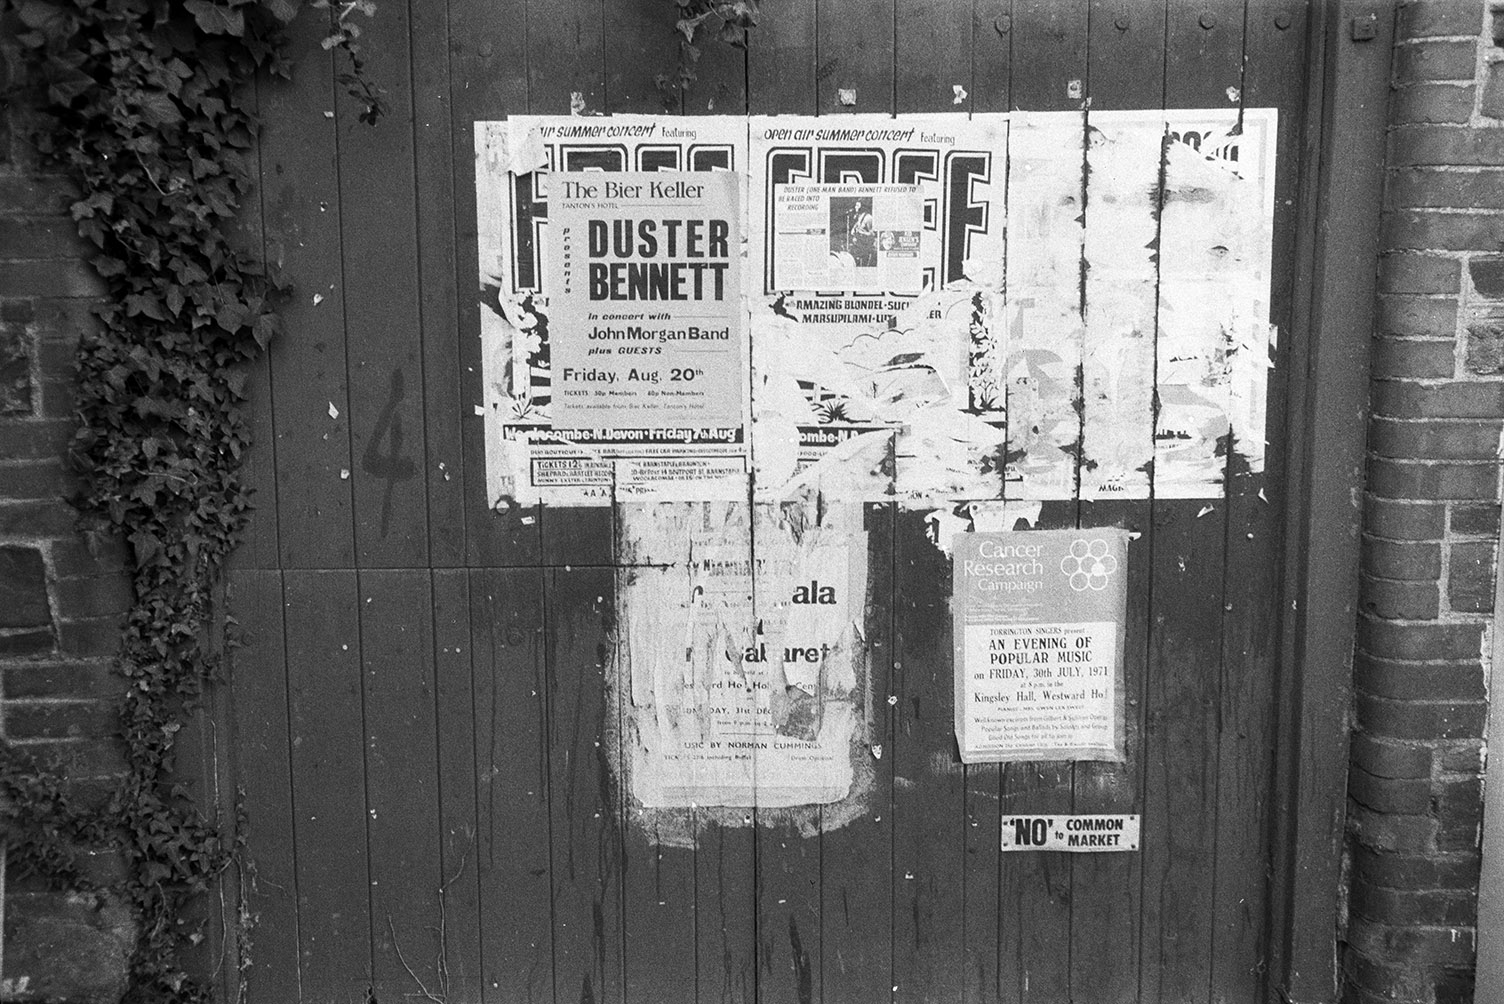 Posters stuck to a wooden doorway in Northam. One poster is advertising Duster Bennett in concert with John Morgan Band at The Bier Keller.